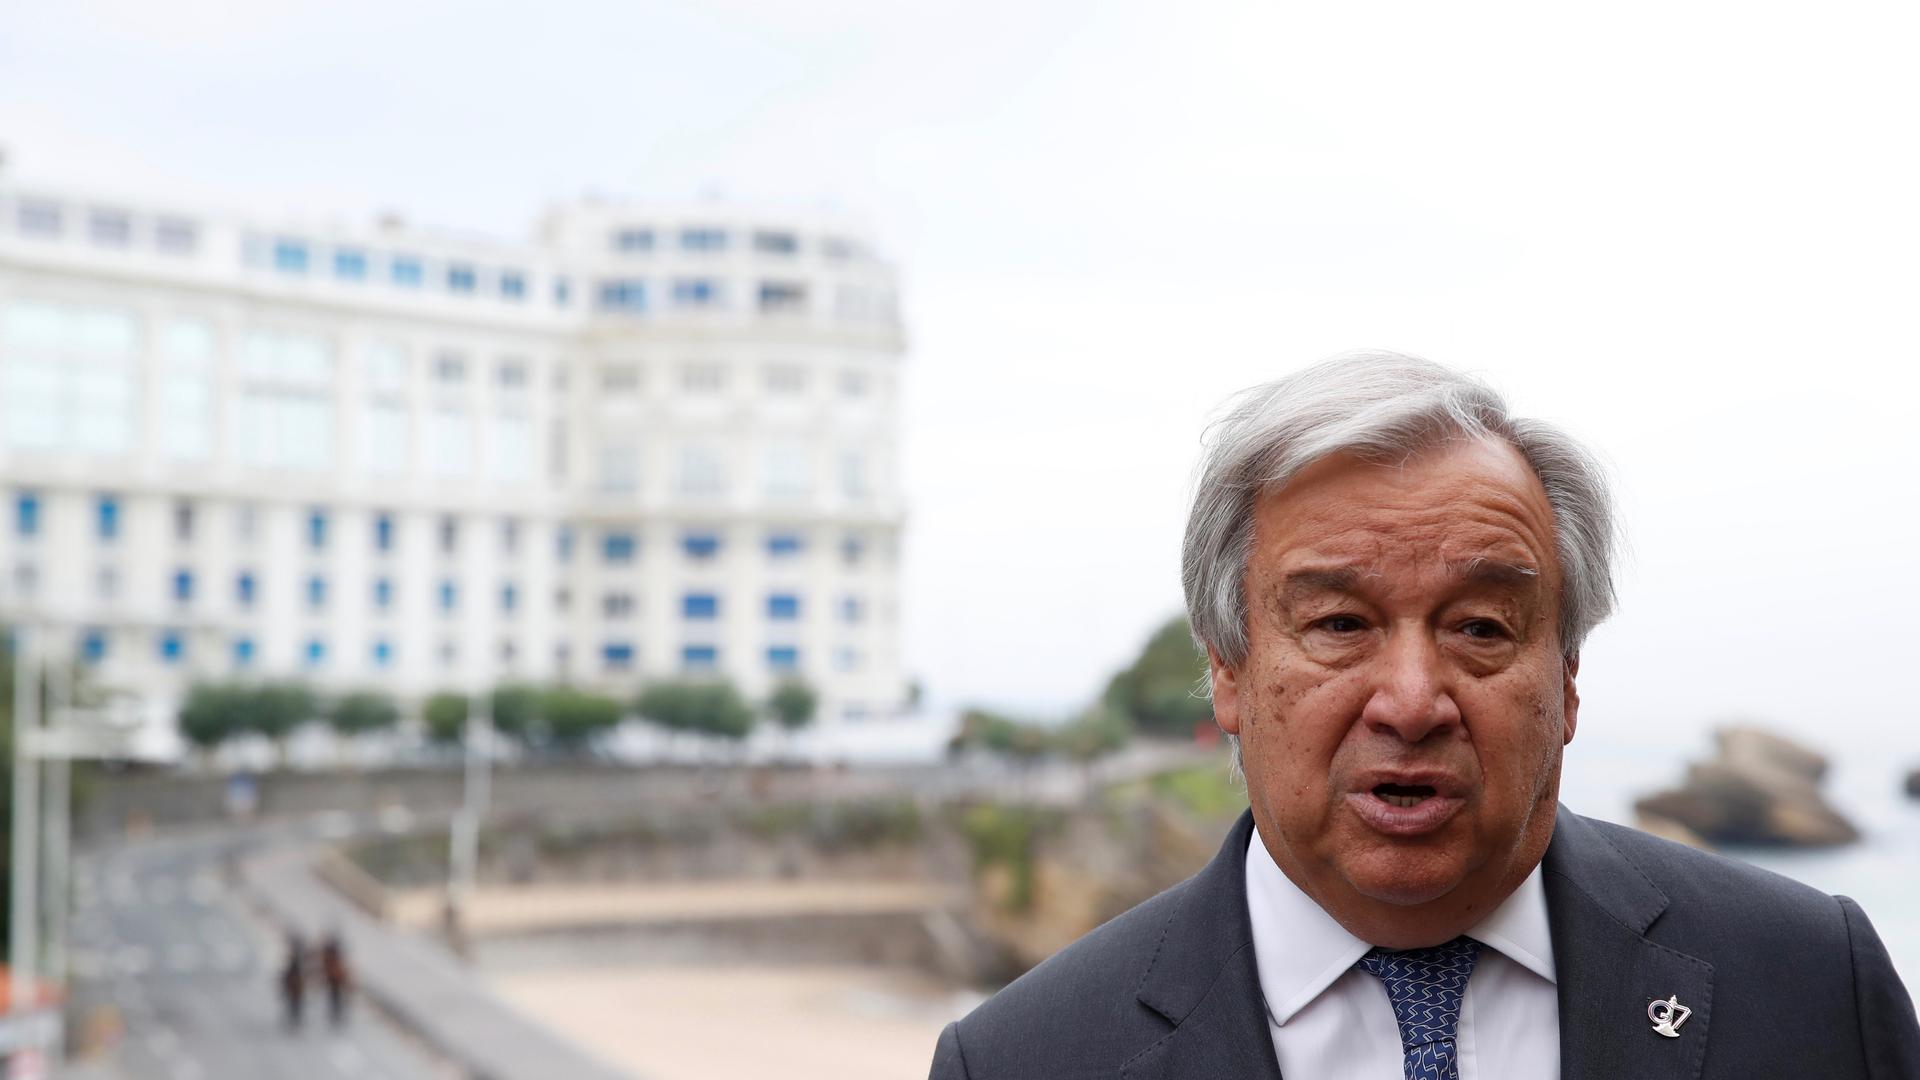 United Nations Secretary-General António Guterres